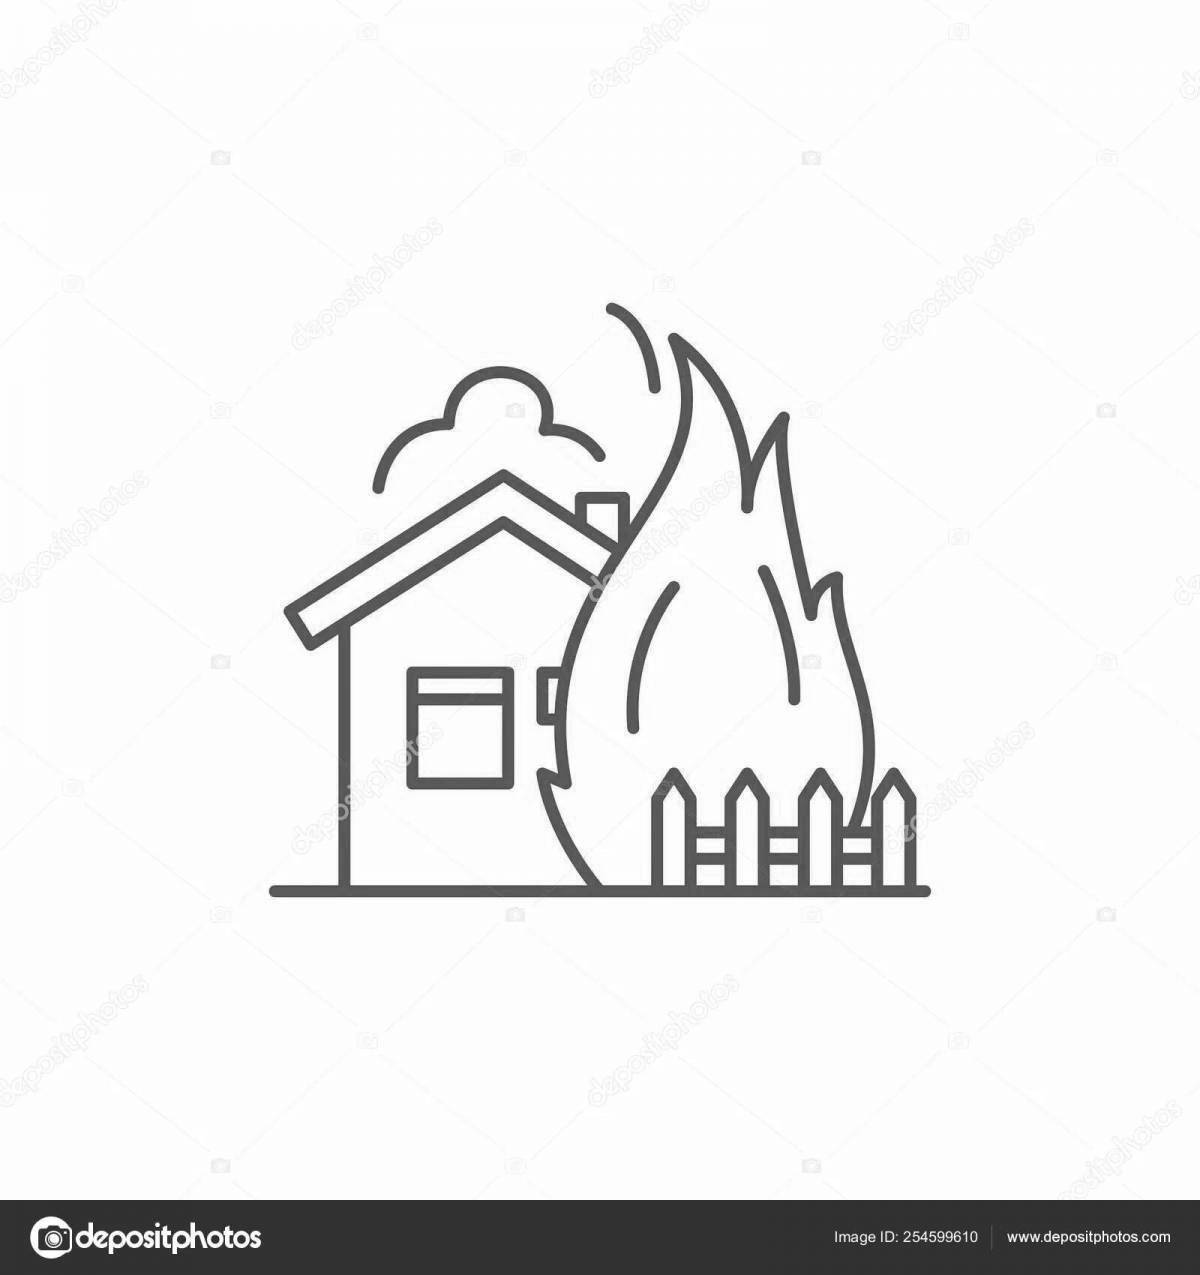 Adorable burning house coloring book for kids